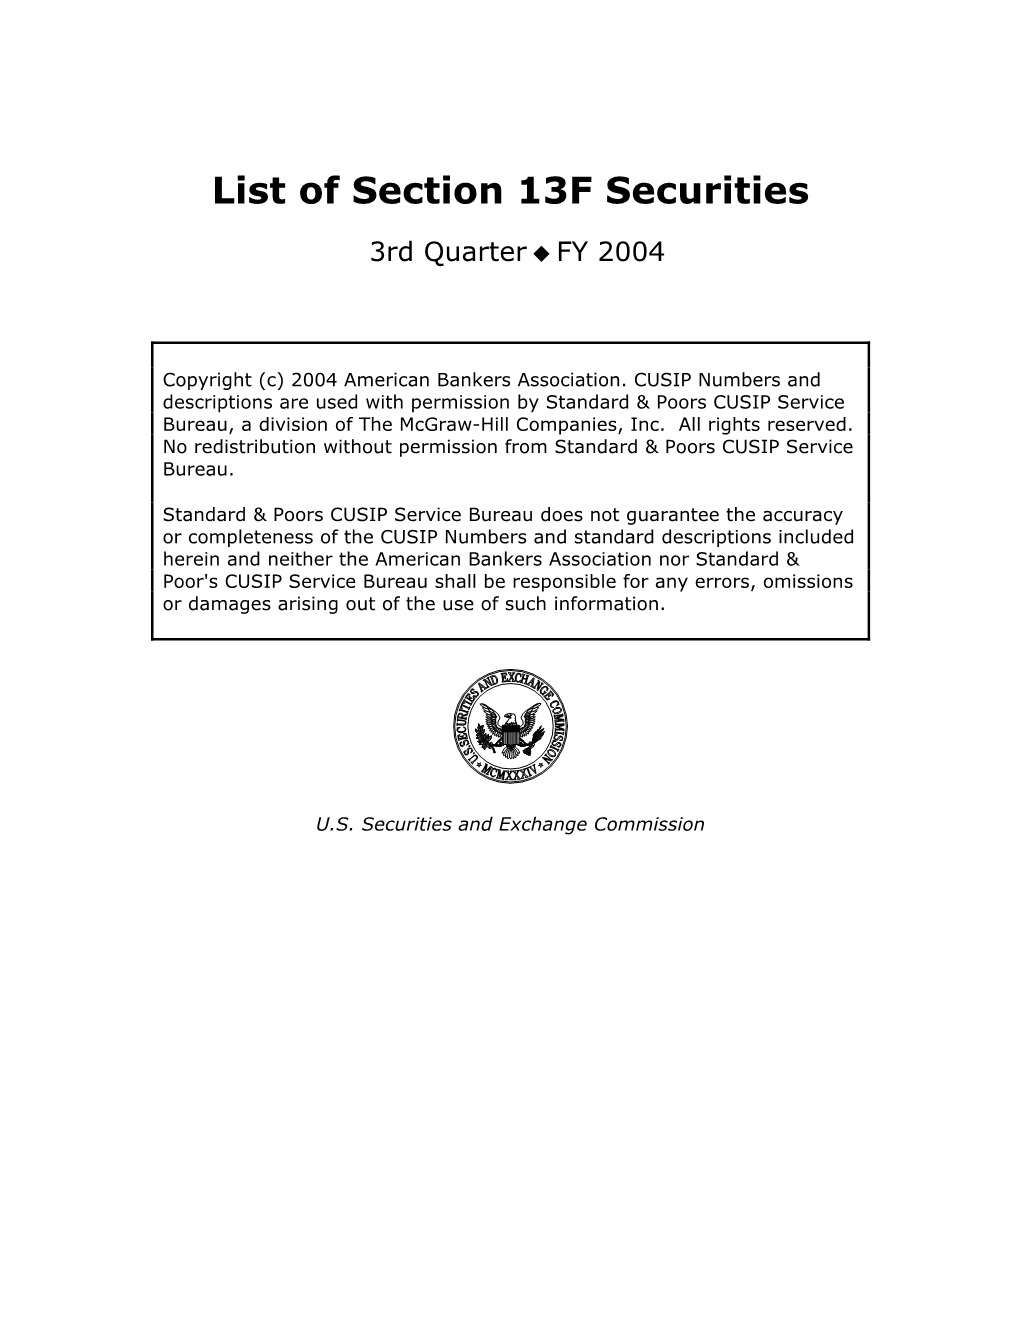 List of Section 13F Securities, 3Rd Quarter, FY 2004